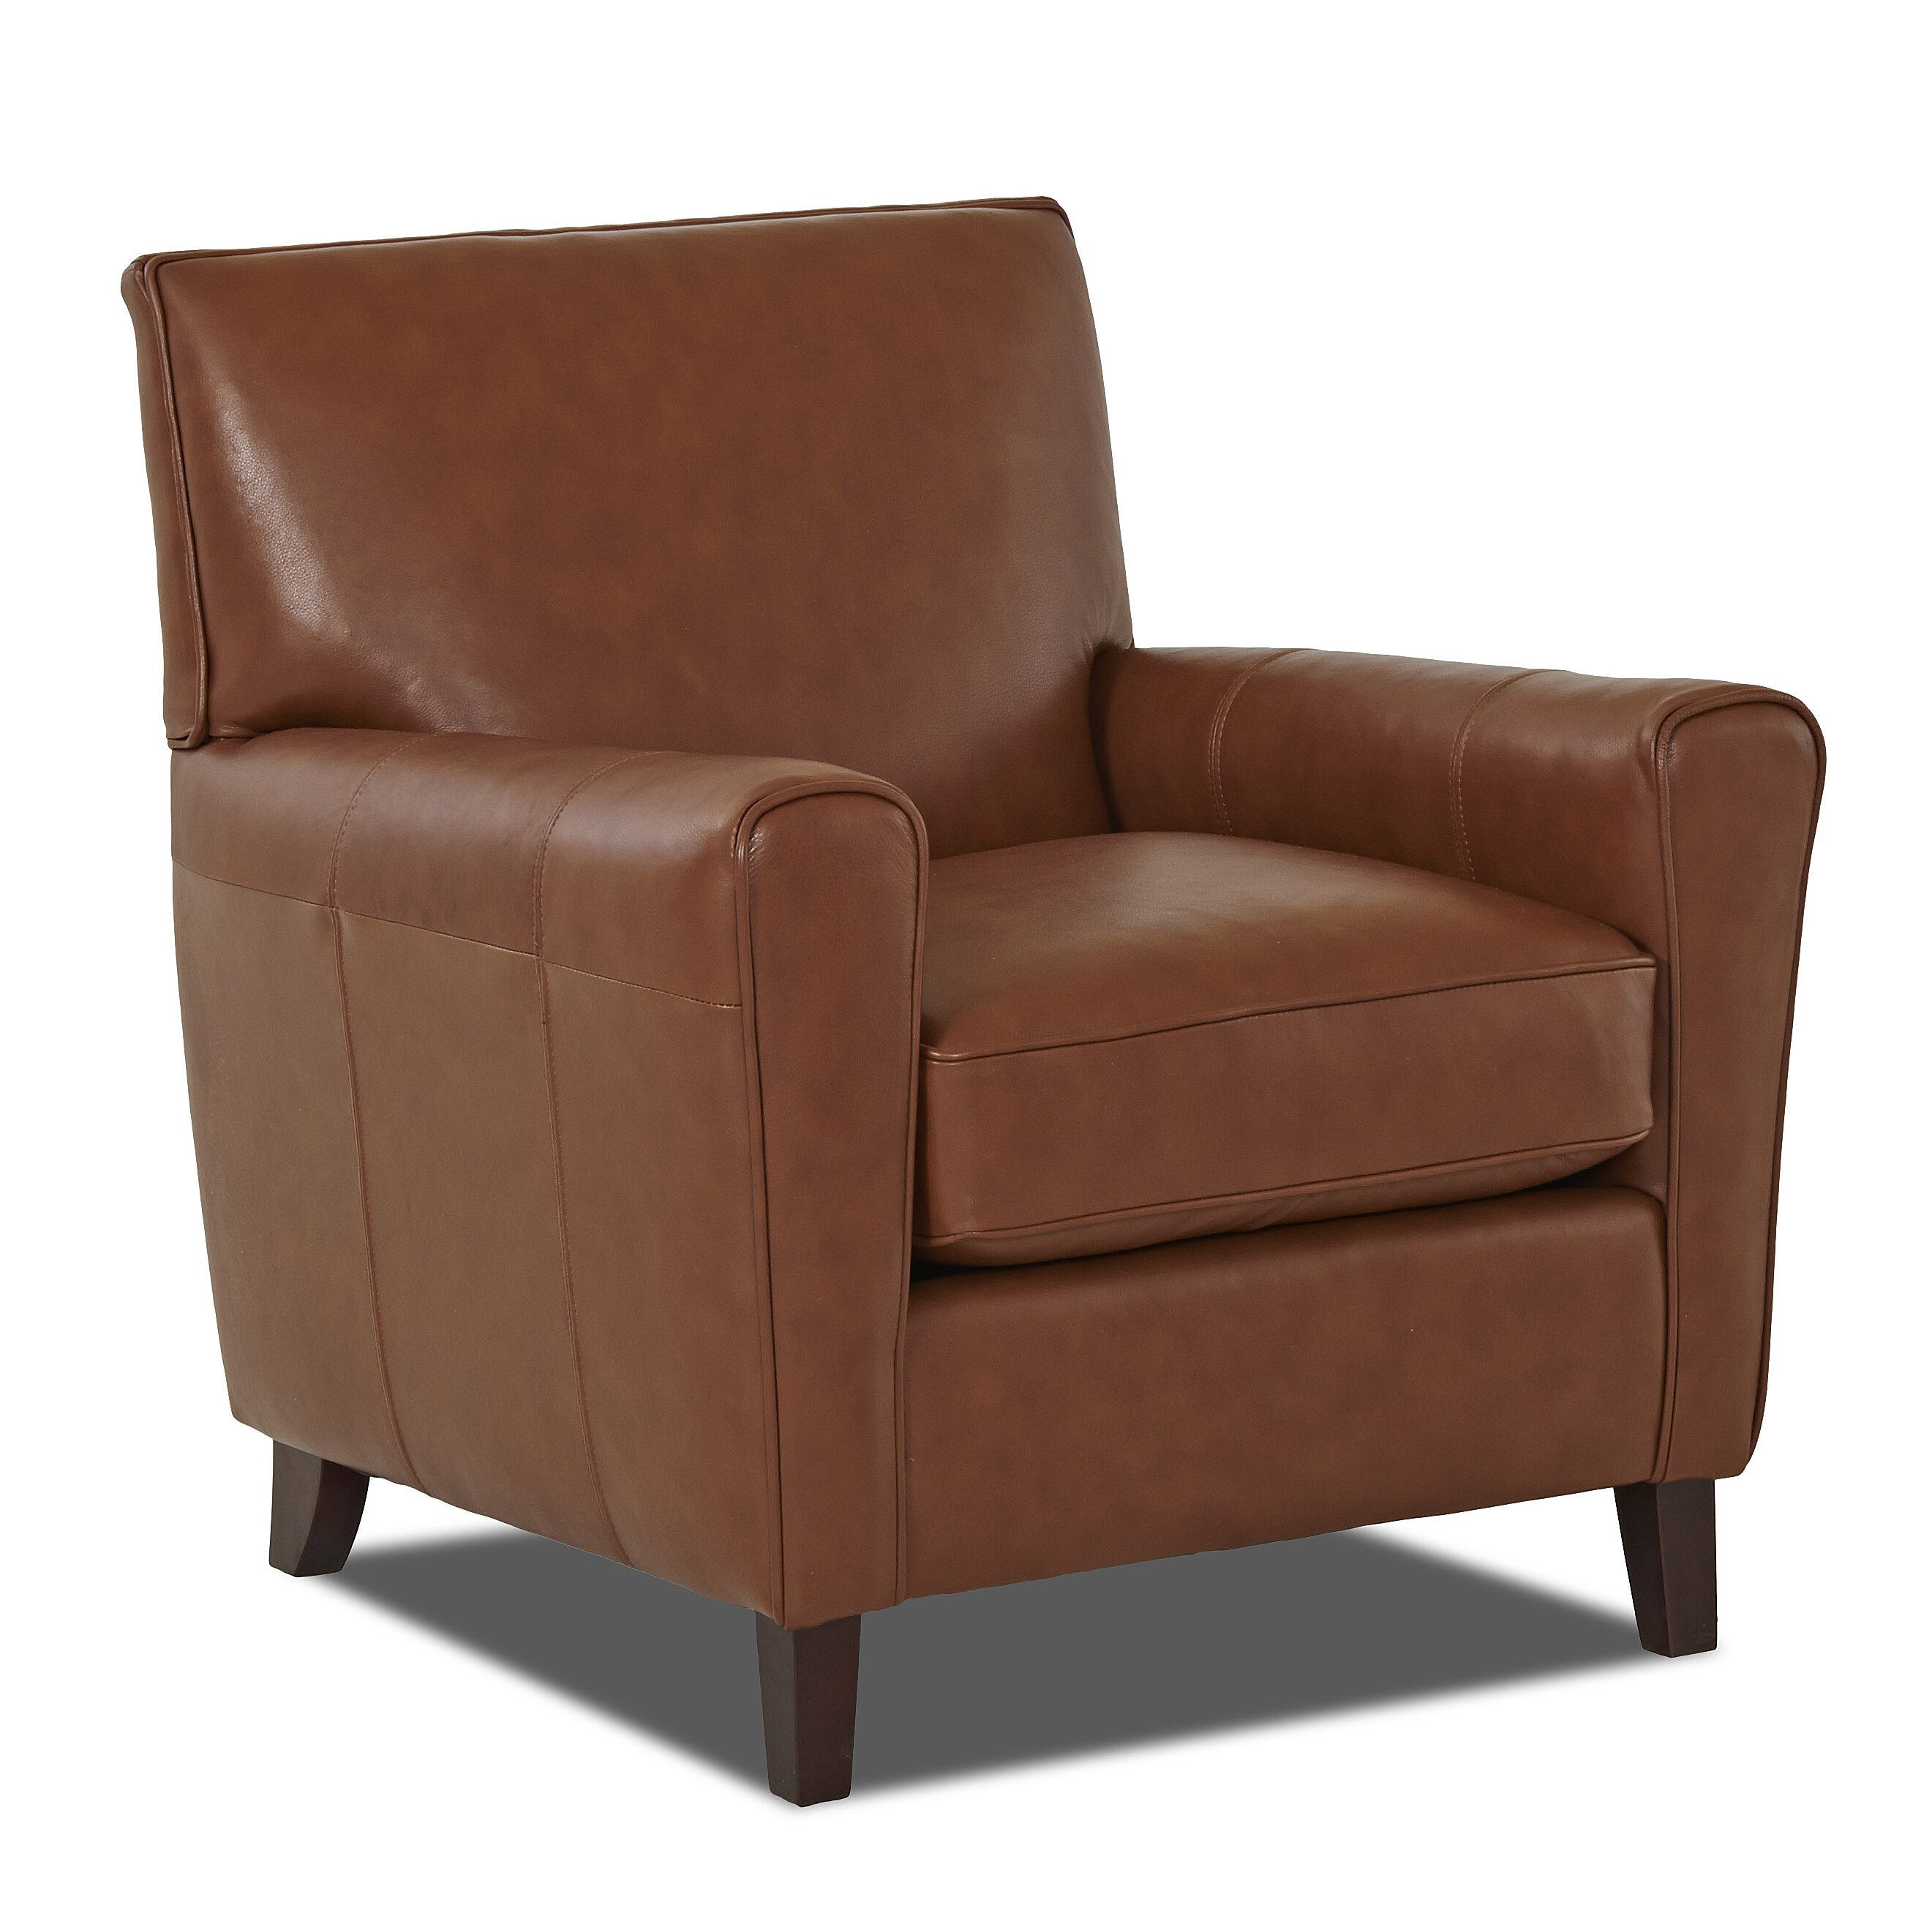 Wayfair Occasional Chairs - Highway Chief Leather Accent Chair